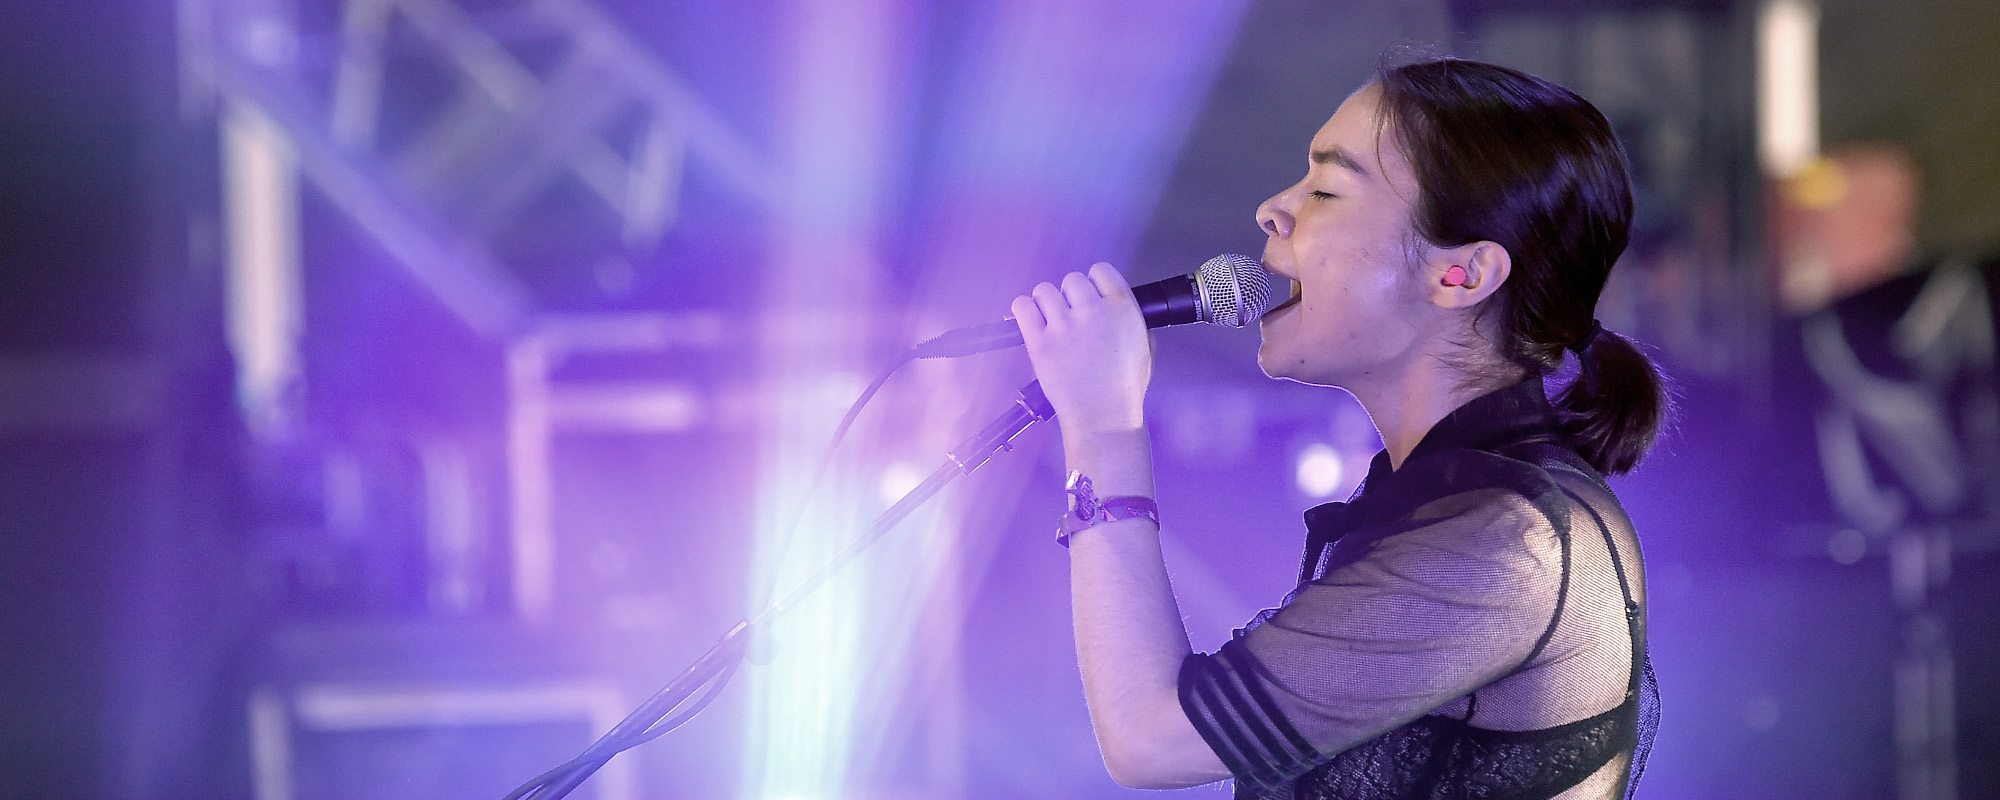 Mitski Comes Clean in “Washing Machine Heart”: Here’s What The Song Really Means